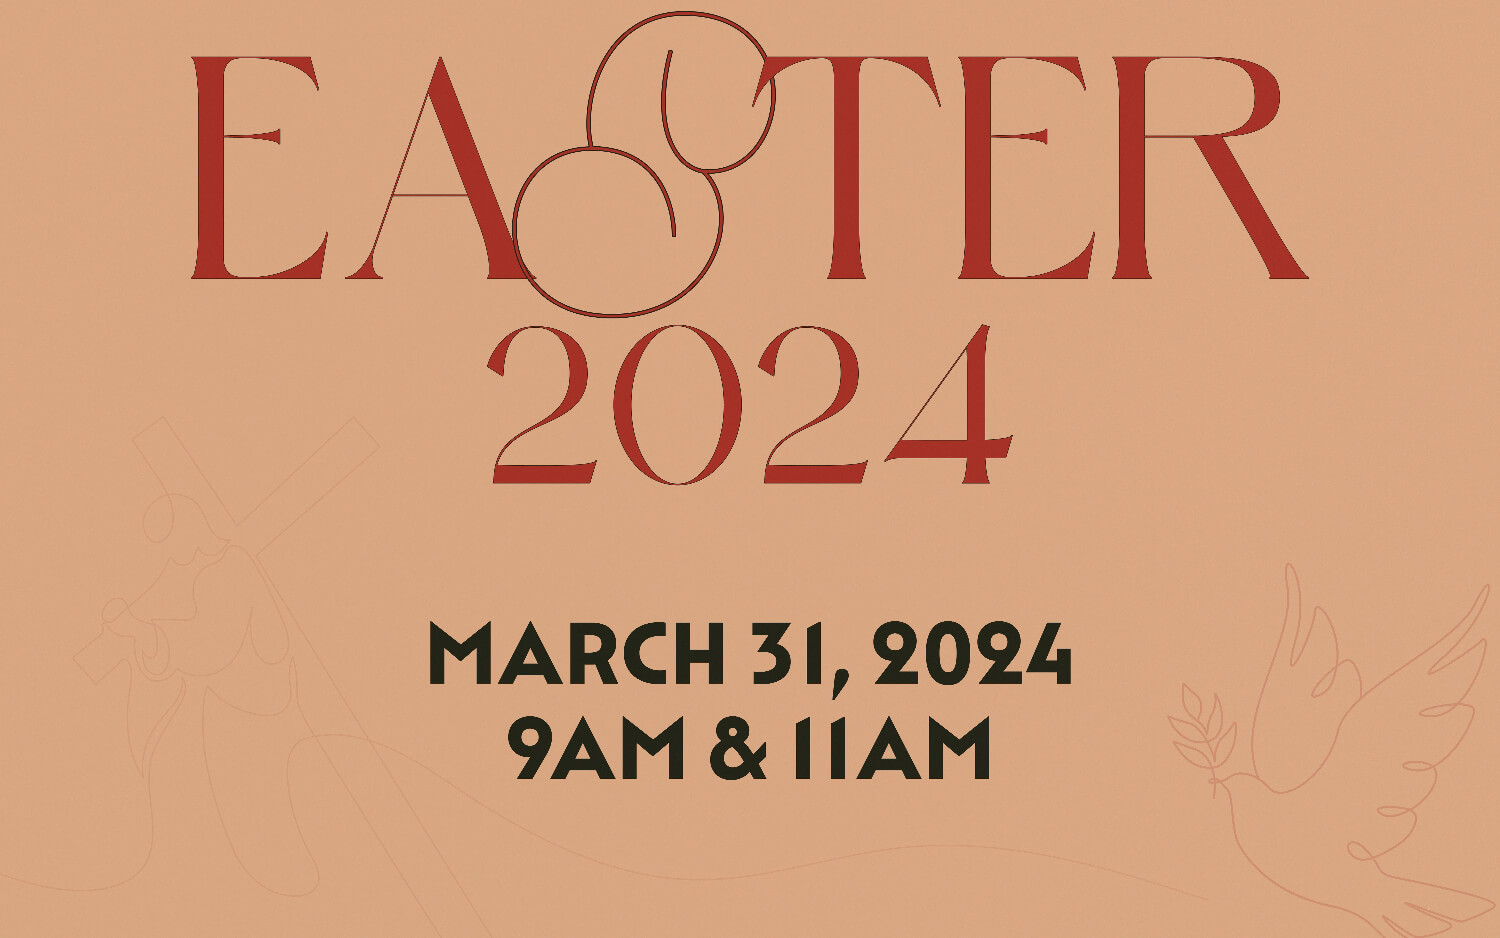 easter service 9am and 11am